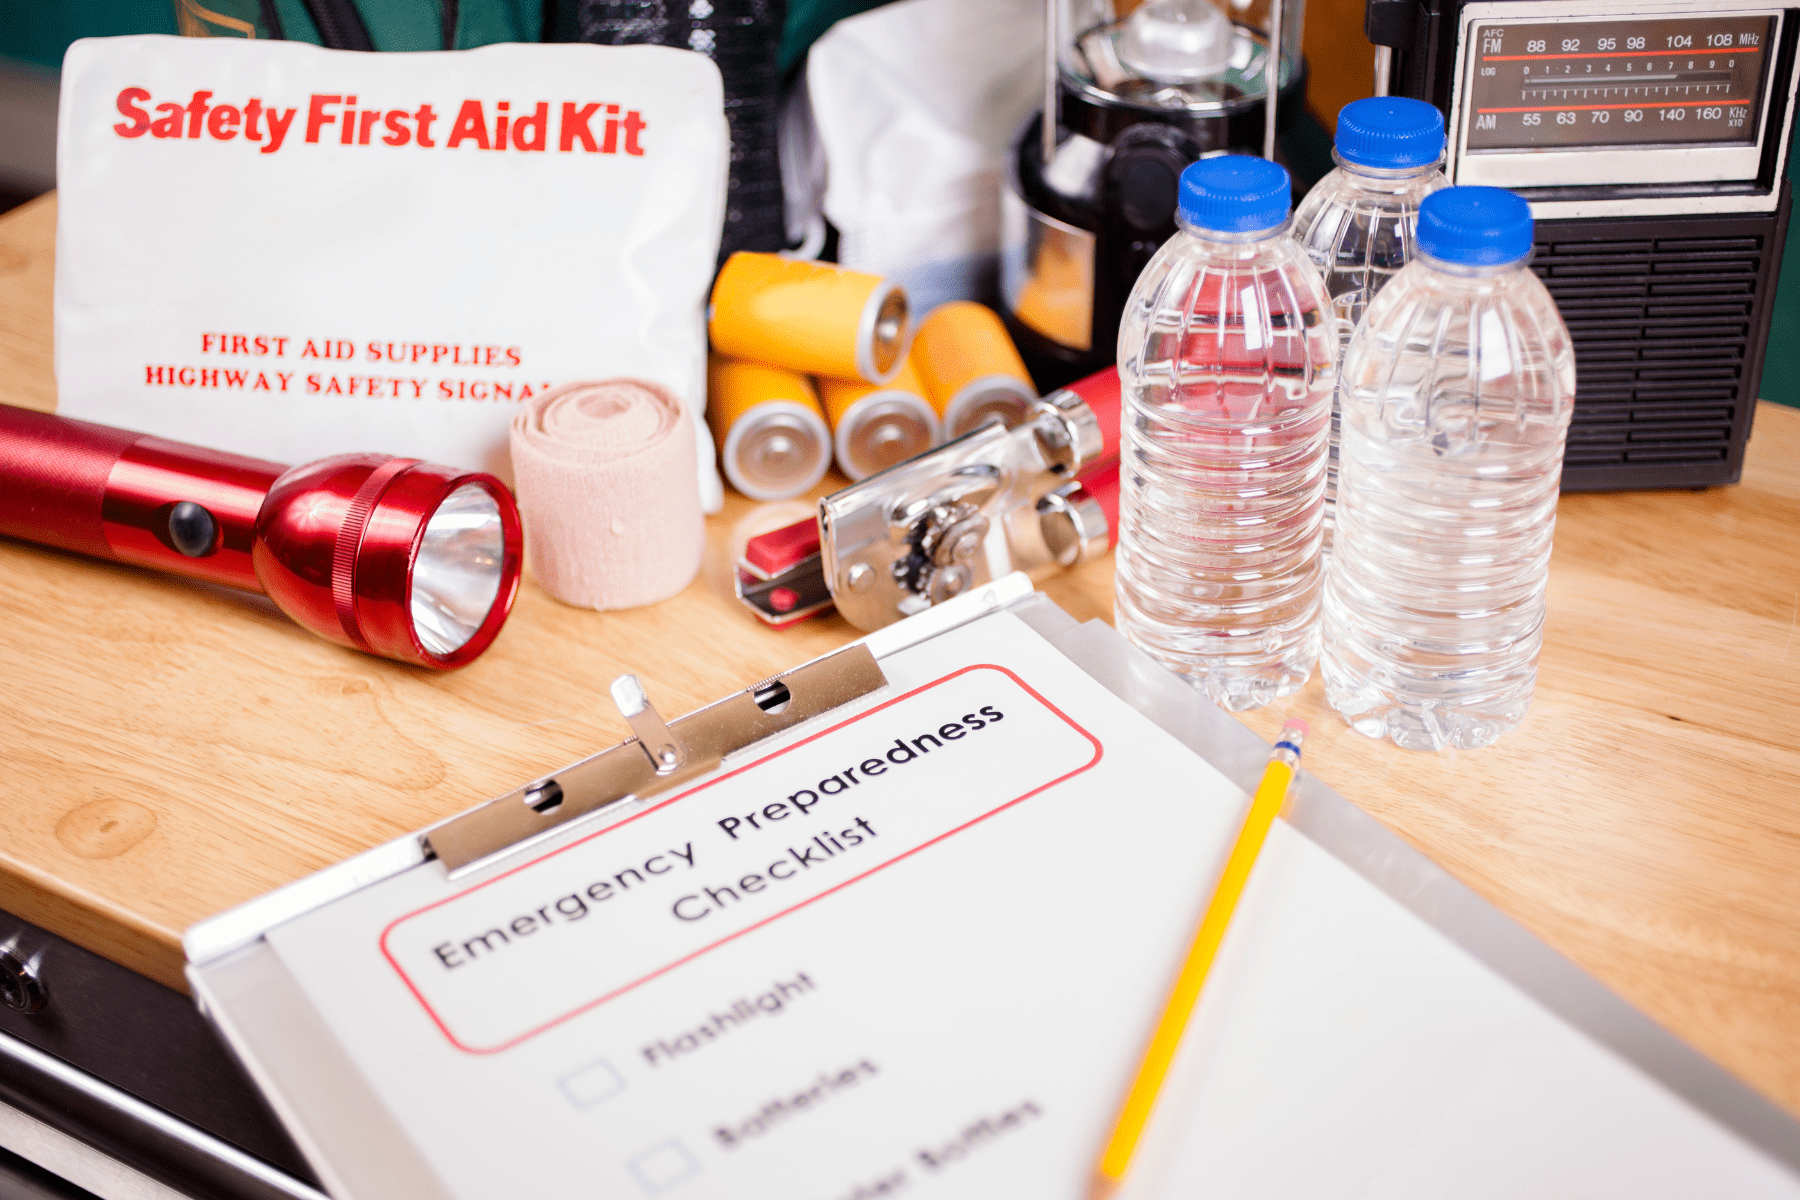 Emergency Prep: Stock Your First-Aid Kit